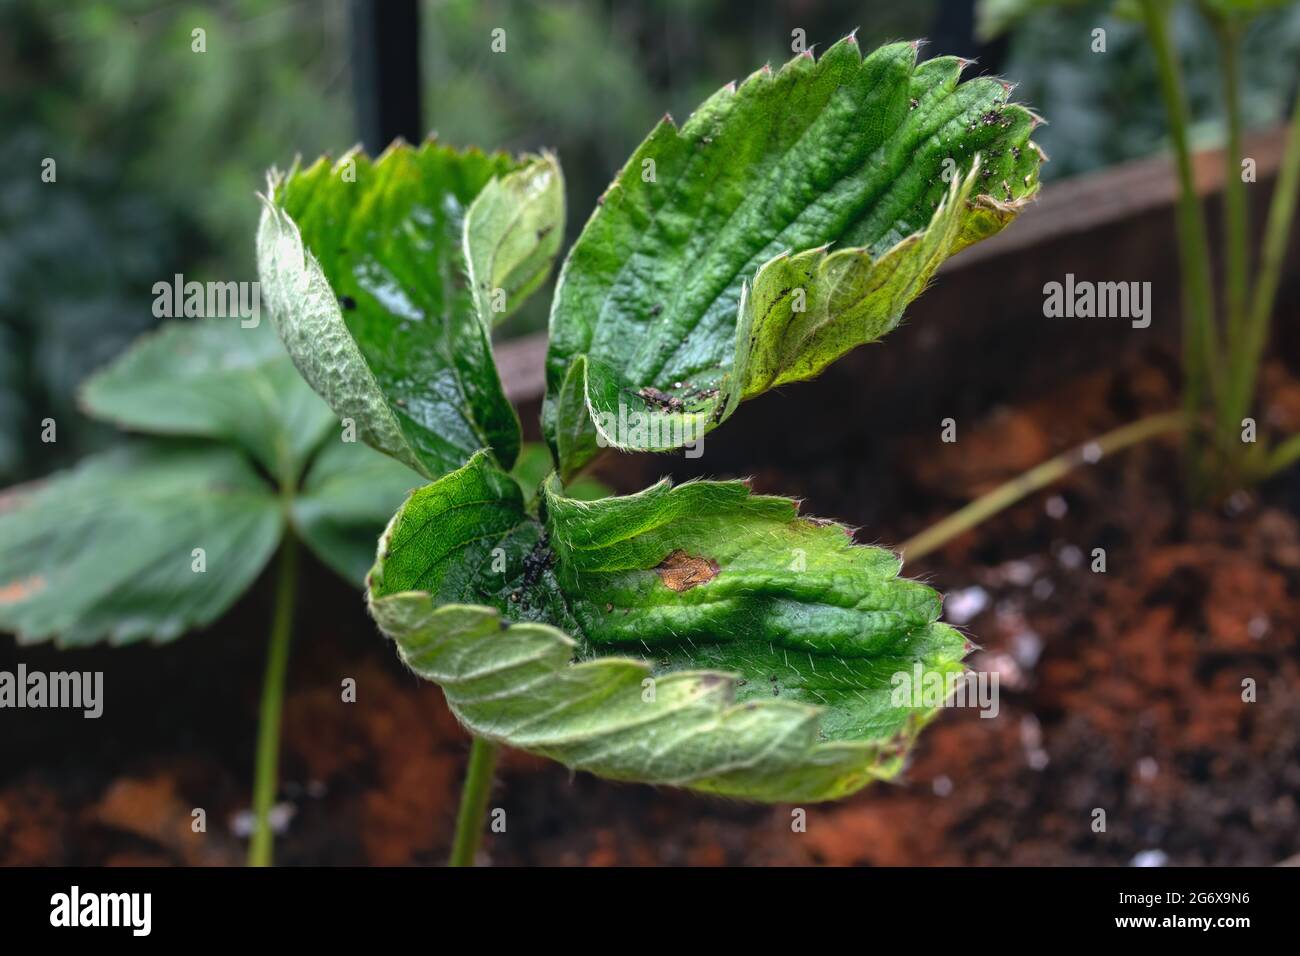 Symptoms of calcium deficiency in Albion strawberry plant - Fragaria Ananassa - from top view. Curled leaves with brown dry tips of strawberry plant. Stock Photo